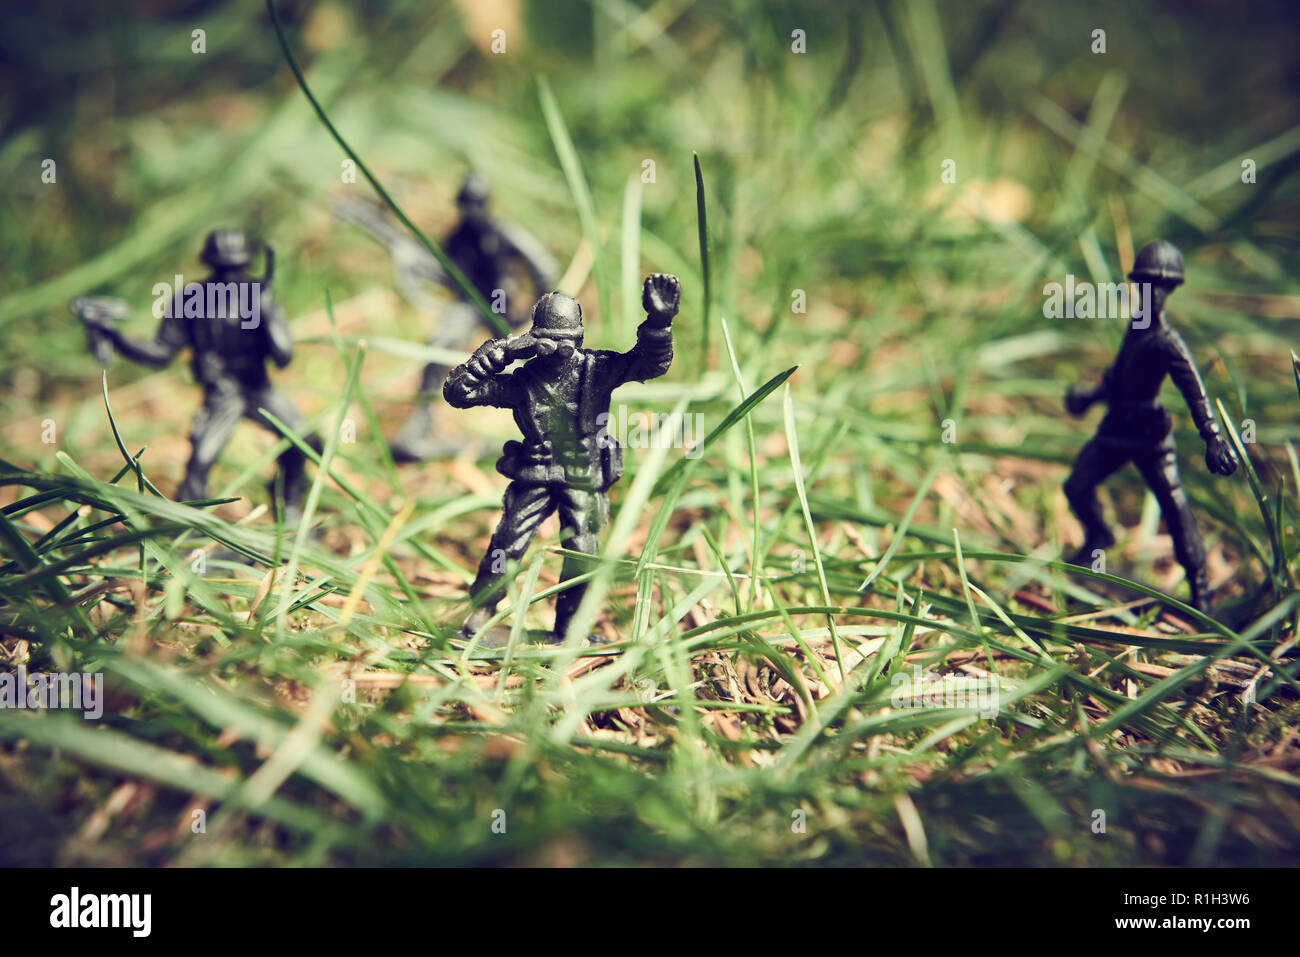 Soldiers in jungle fighting. Concept image of toy plastic soldiers in real grass.  Selective focus. Stock Photo